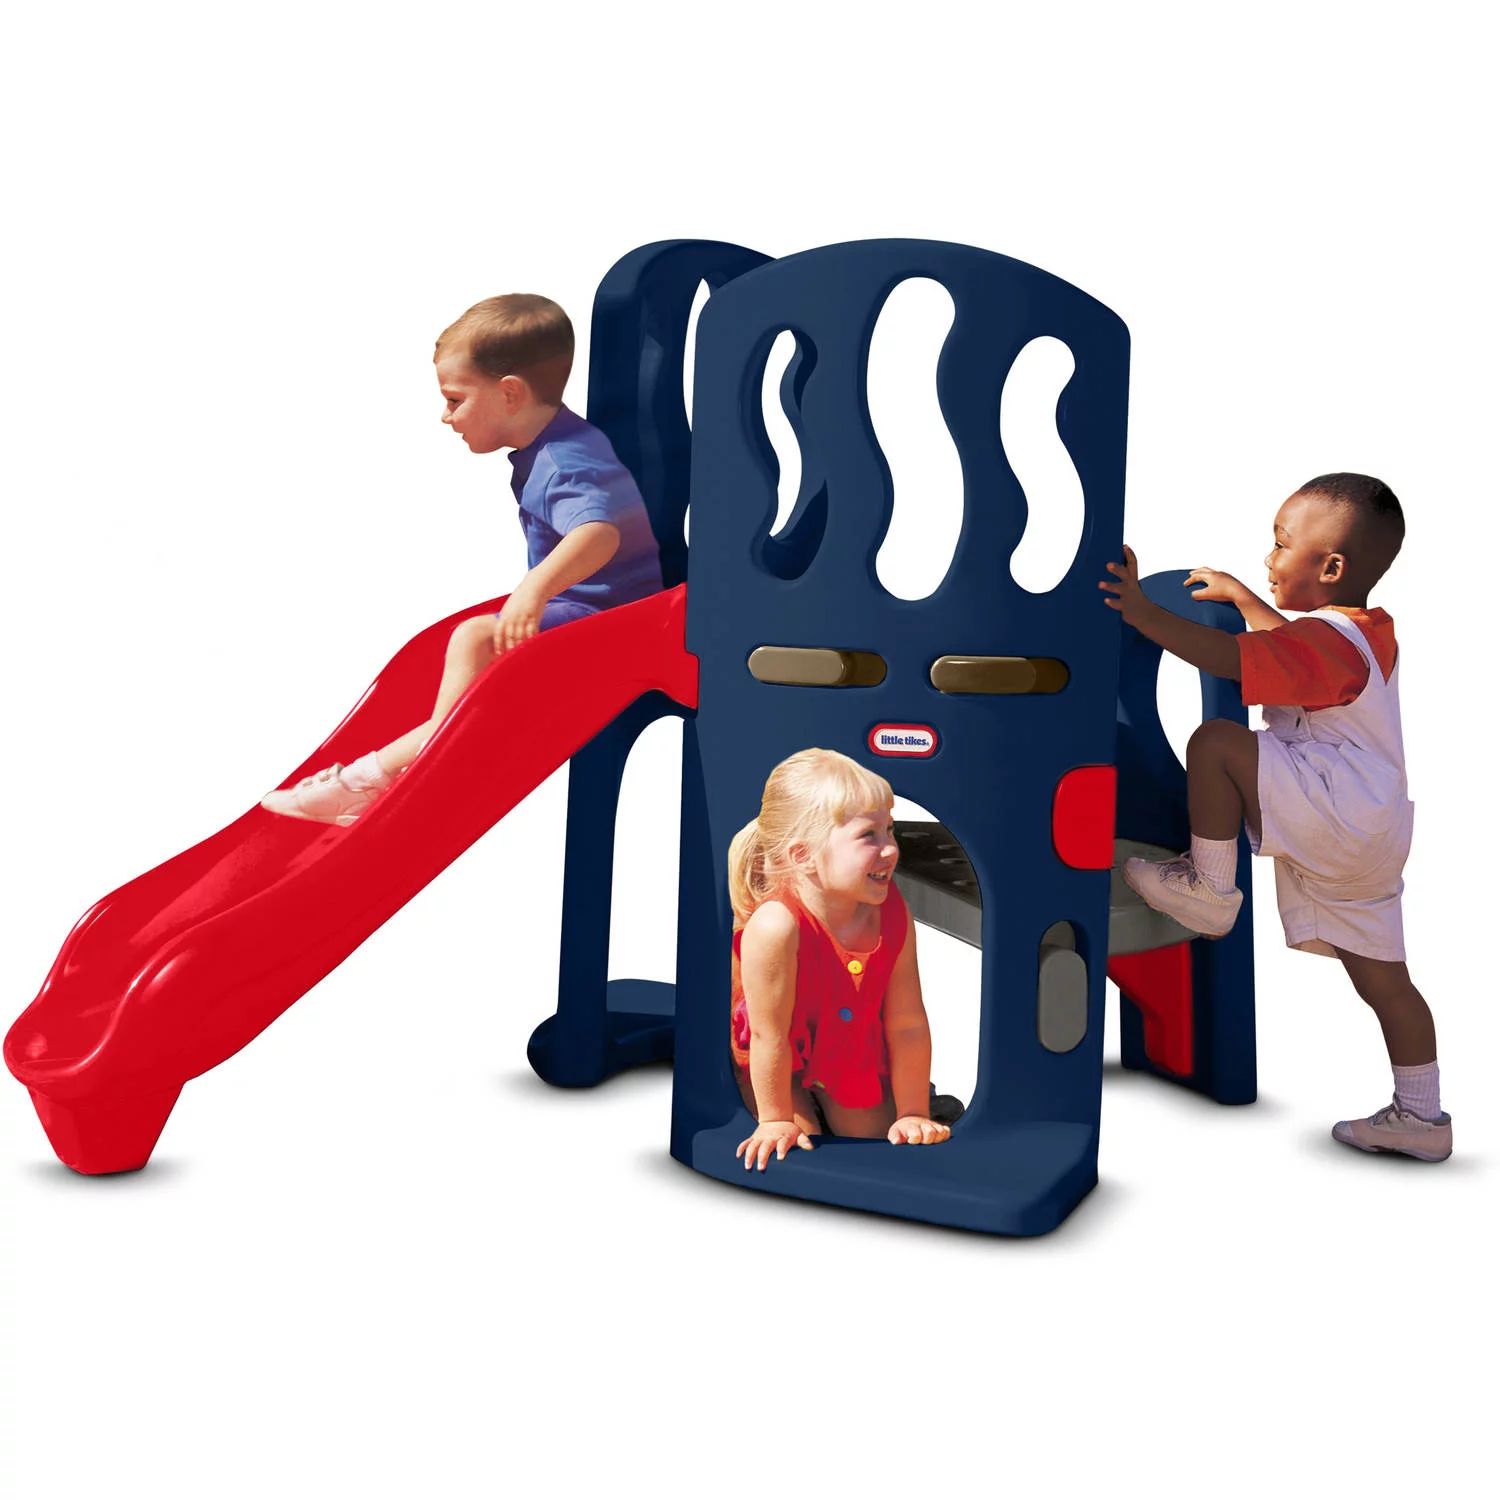 Little Tikes Hide & Slide Climber, Blue & Red - Climbing Toy and Slide for Kids Ages 2 to 6 | Walmart (US)